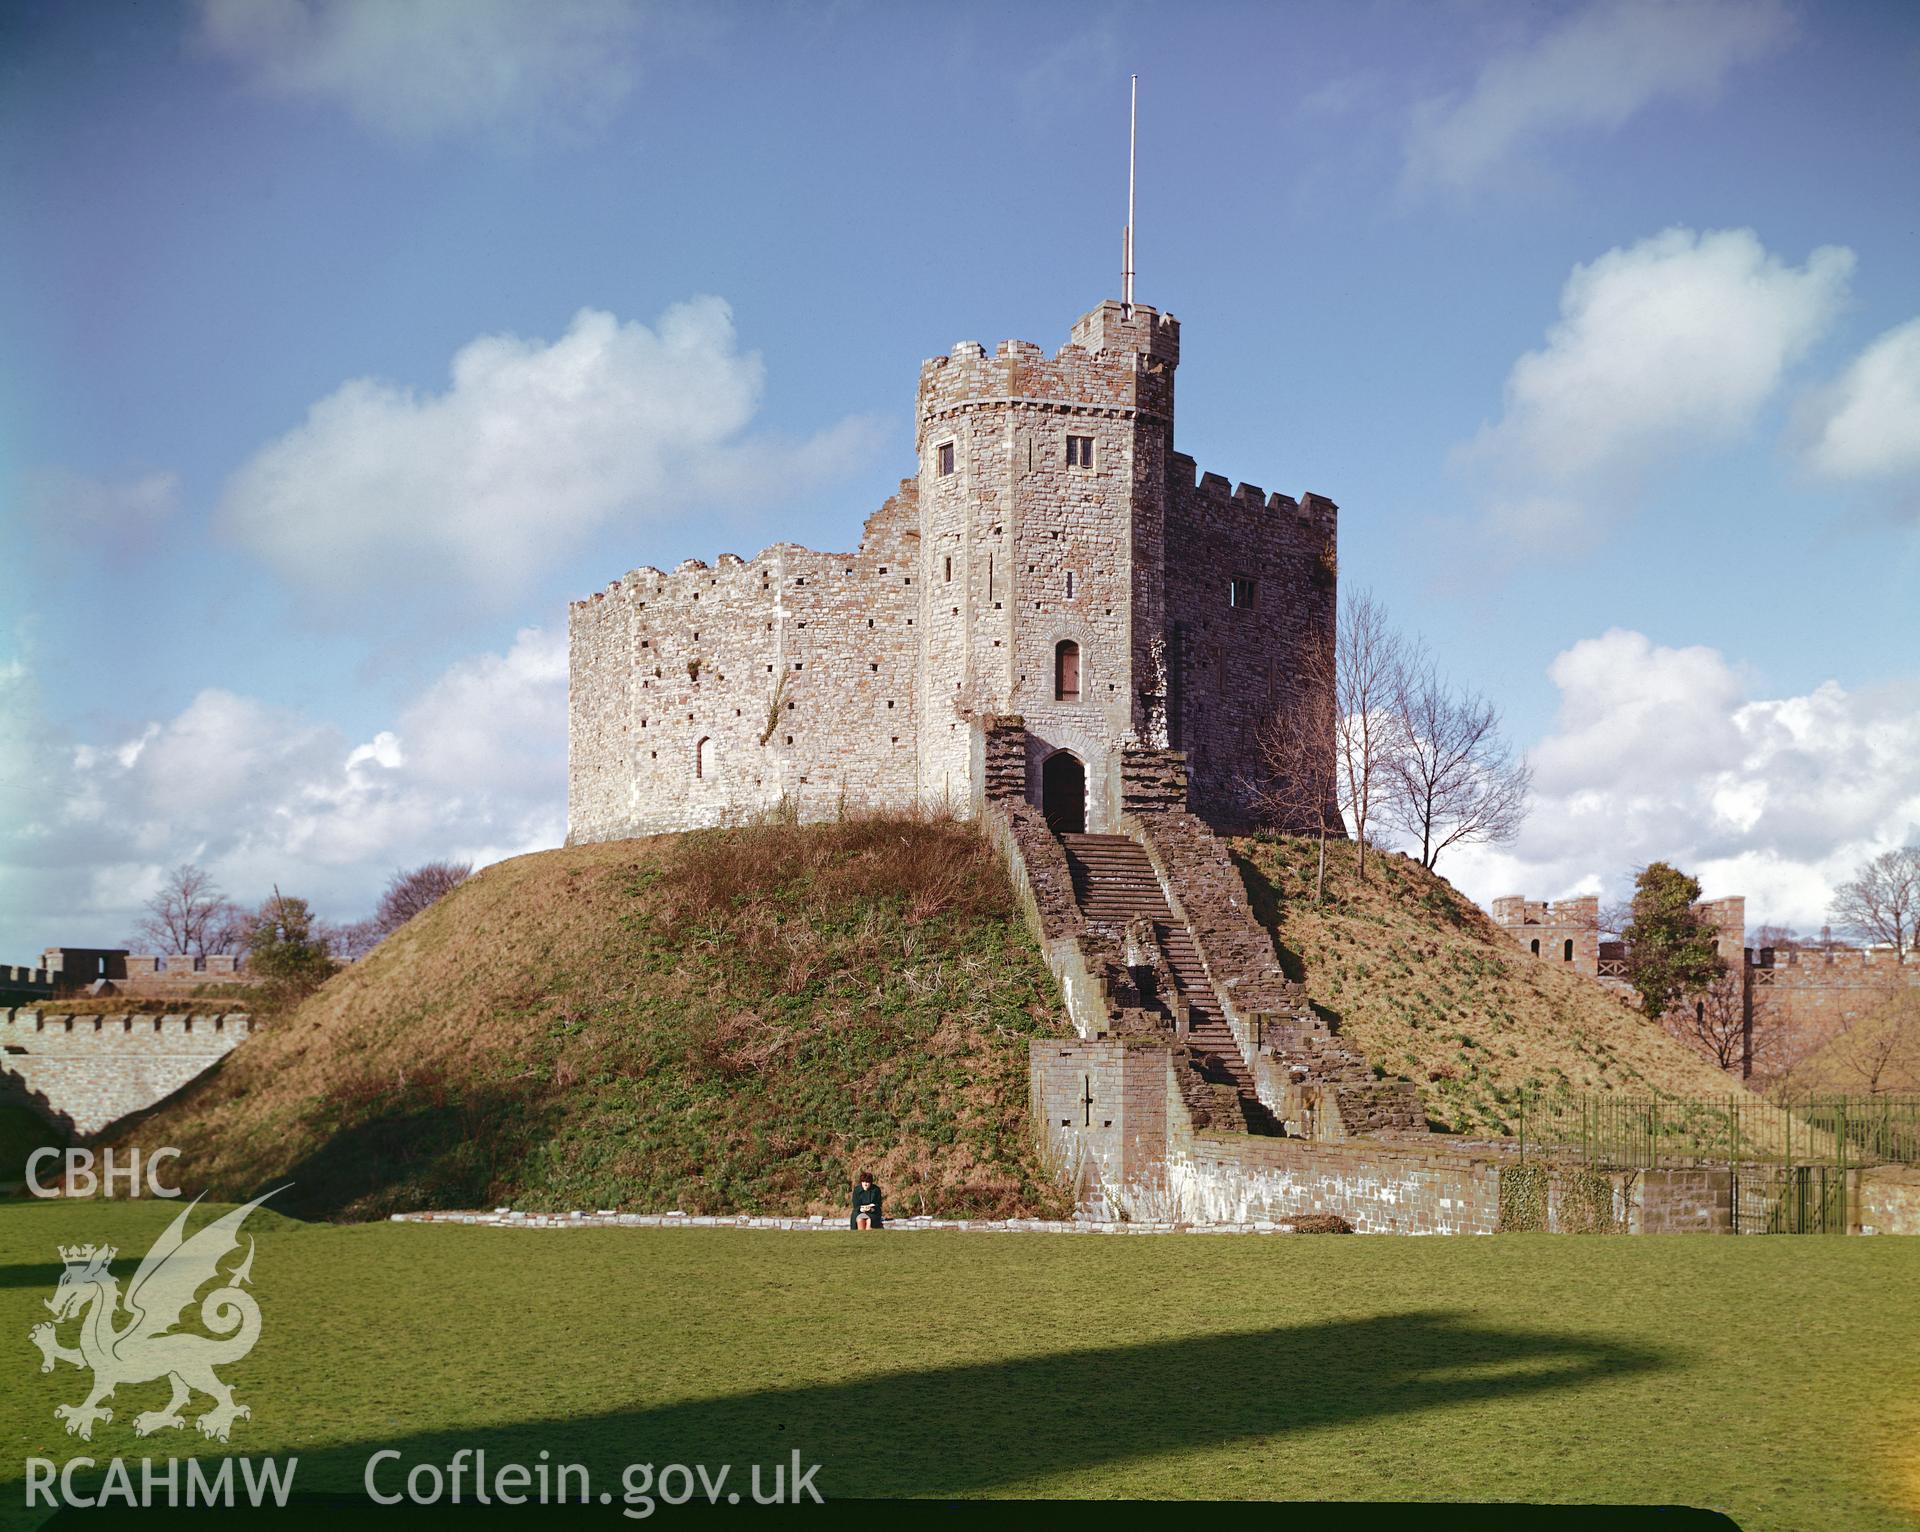 RCAHMW colour transparency showing the White Tower at Cardiff Castle.